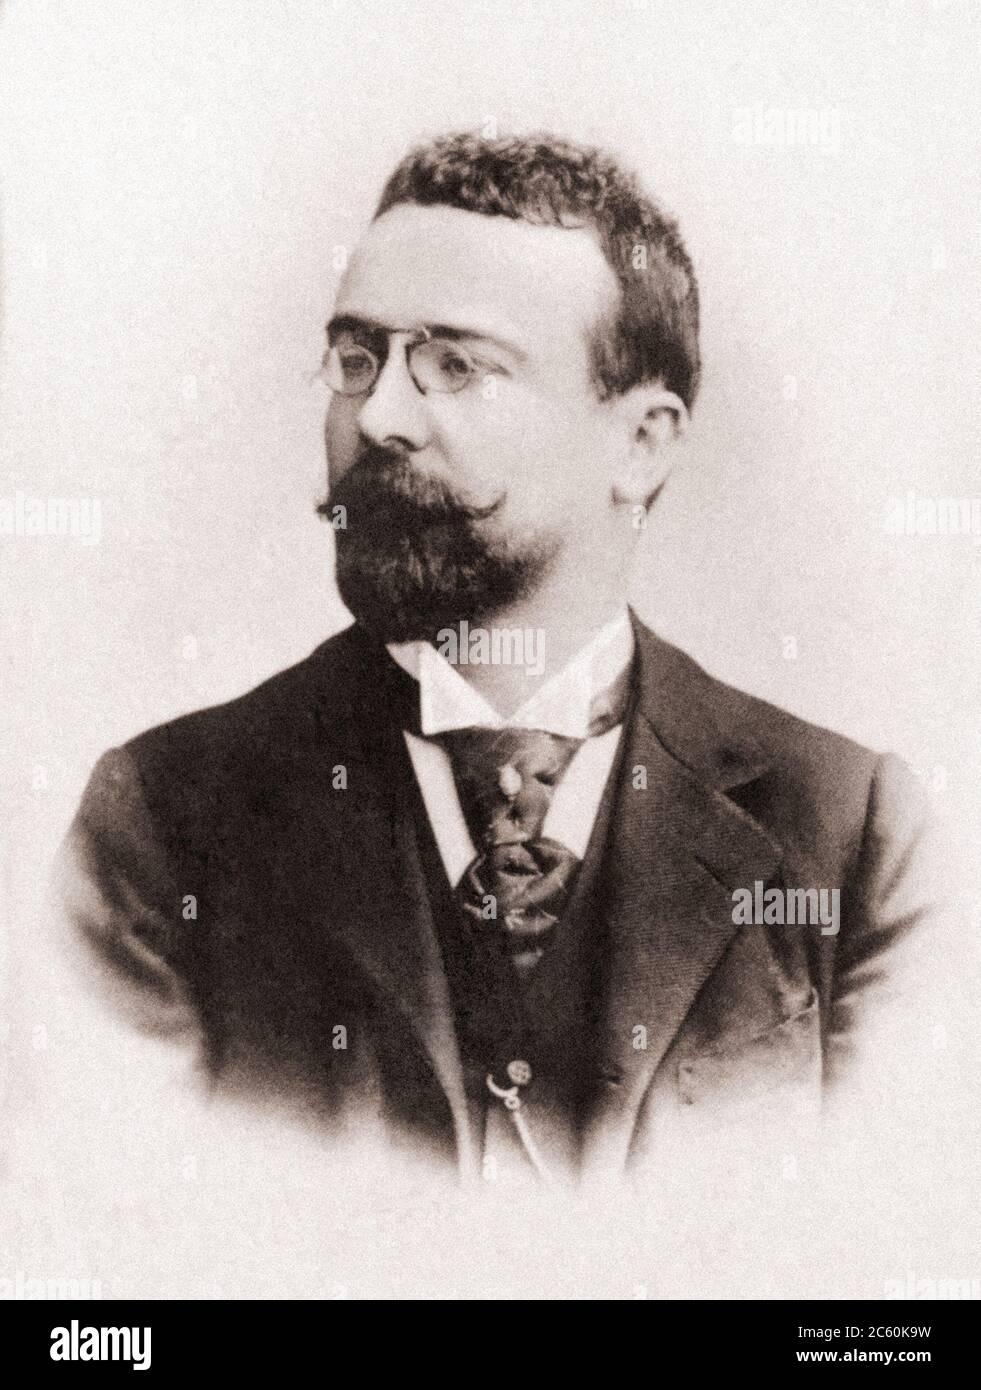 Jean Louis Barthou (1862 – 1934) was a French politician of the Third Republic who served as Prime Minister of France for eight months in 1913. In soc Stock Photo